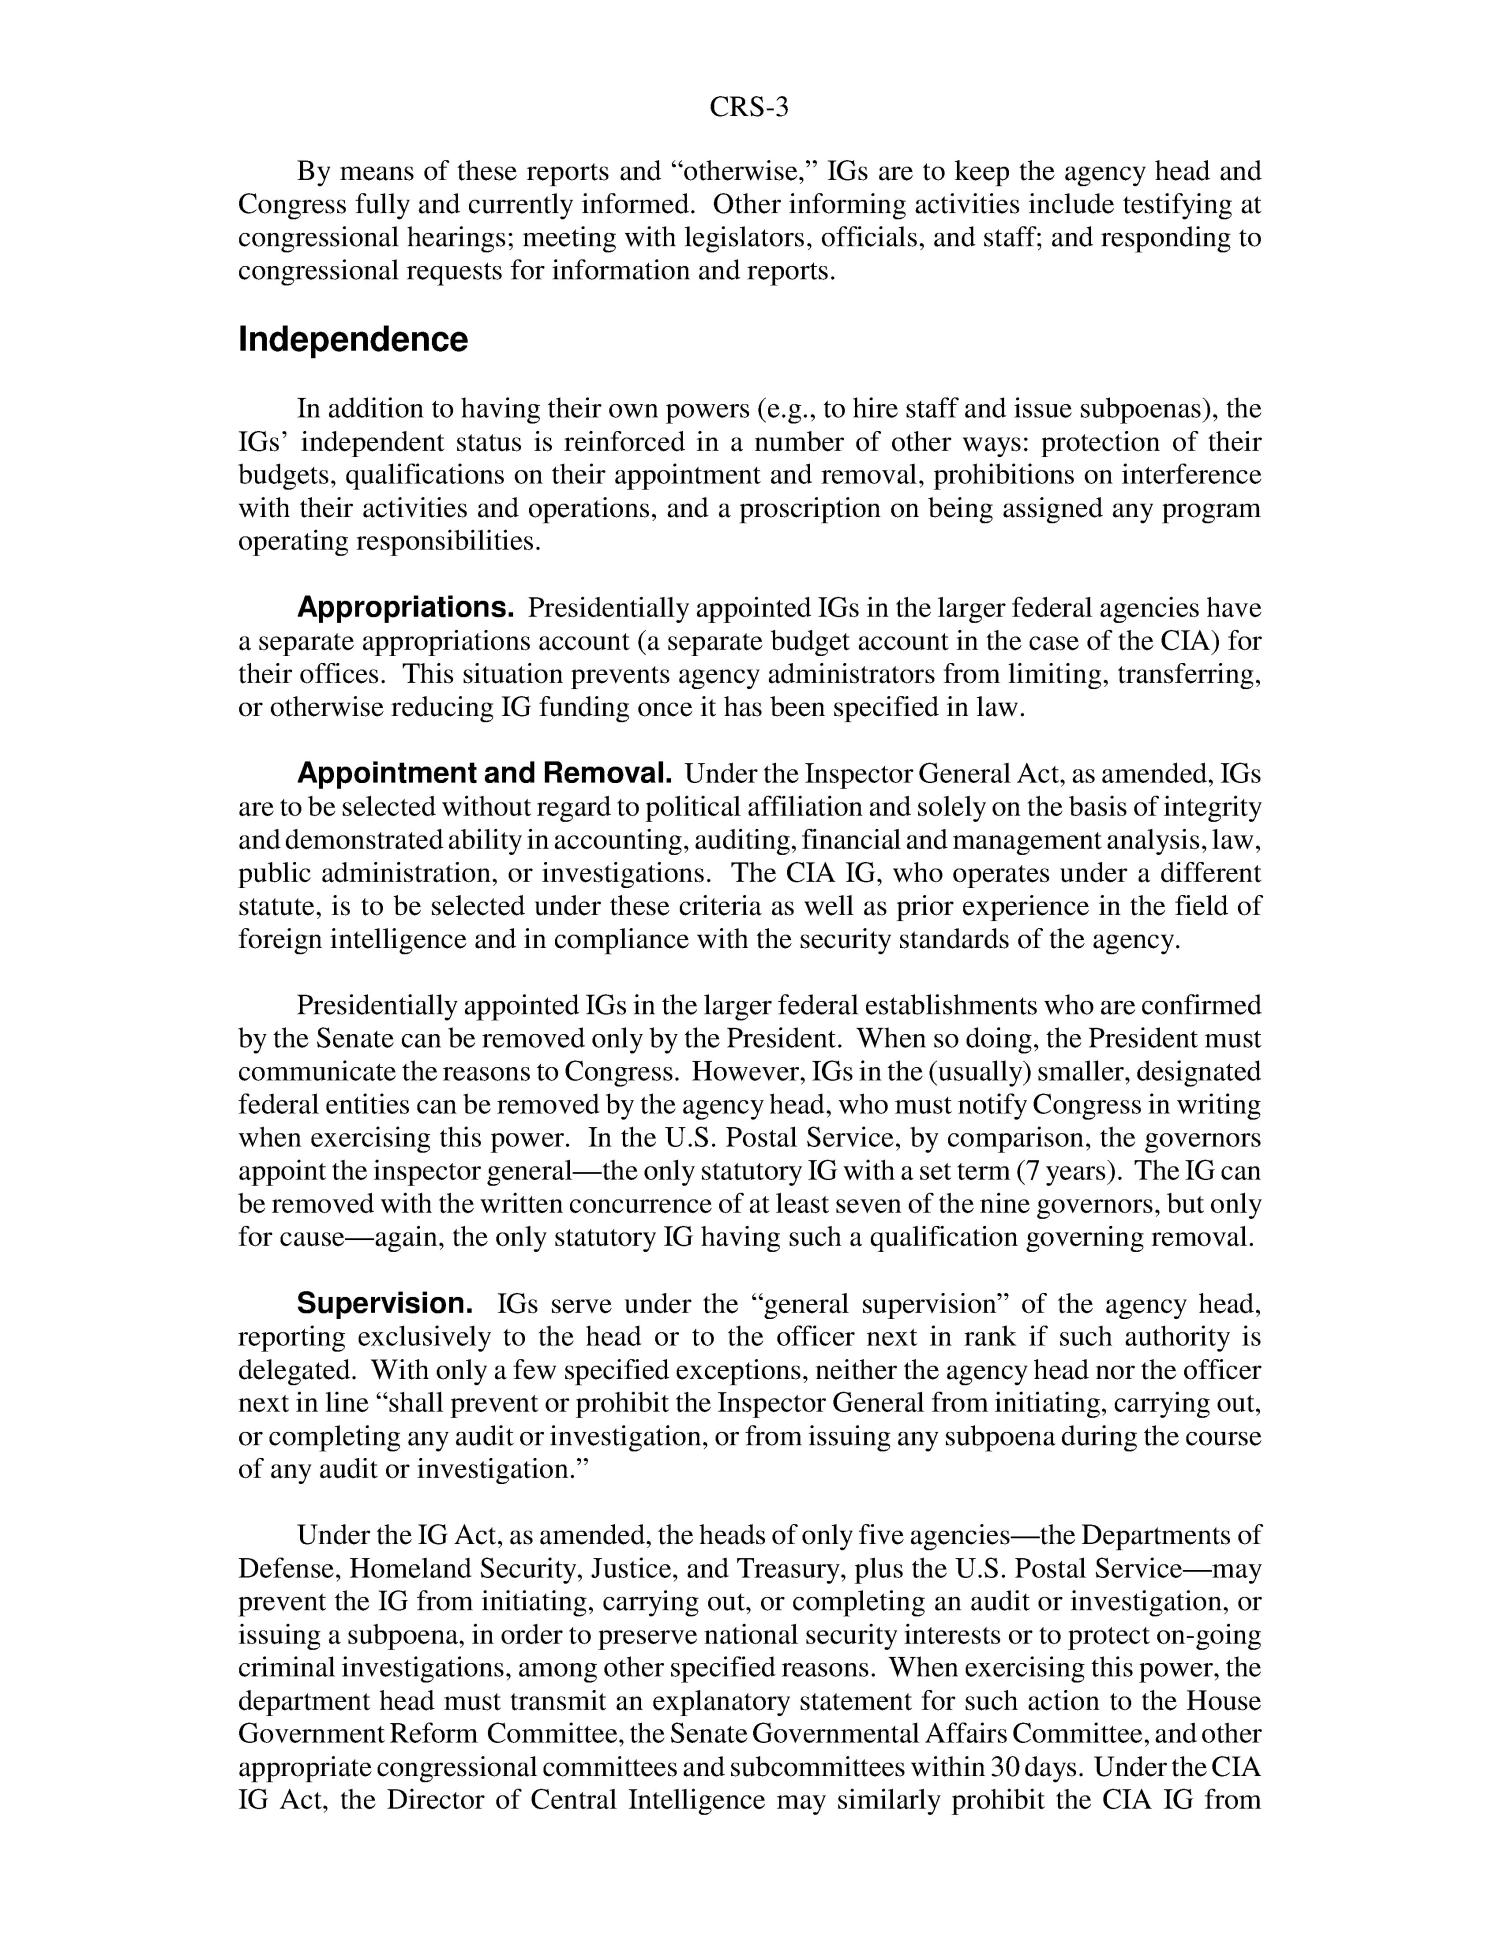 Statutory Offices of Inspector General: Establishment and Evolution
                                                
                                                    [Sequence #]: 3 of 6
                                                